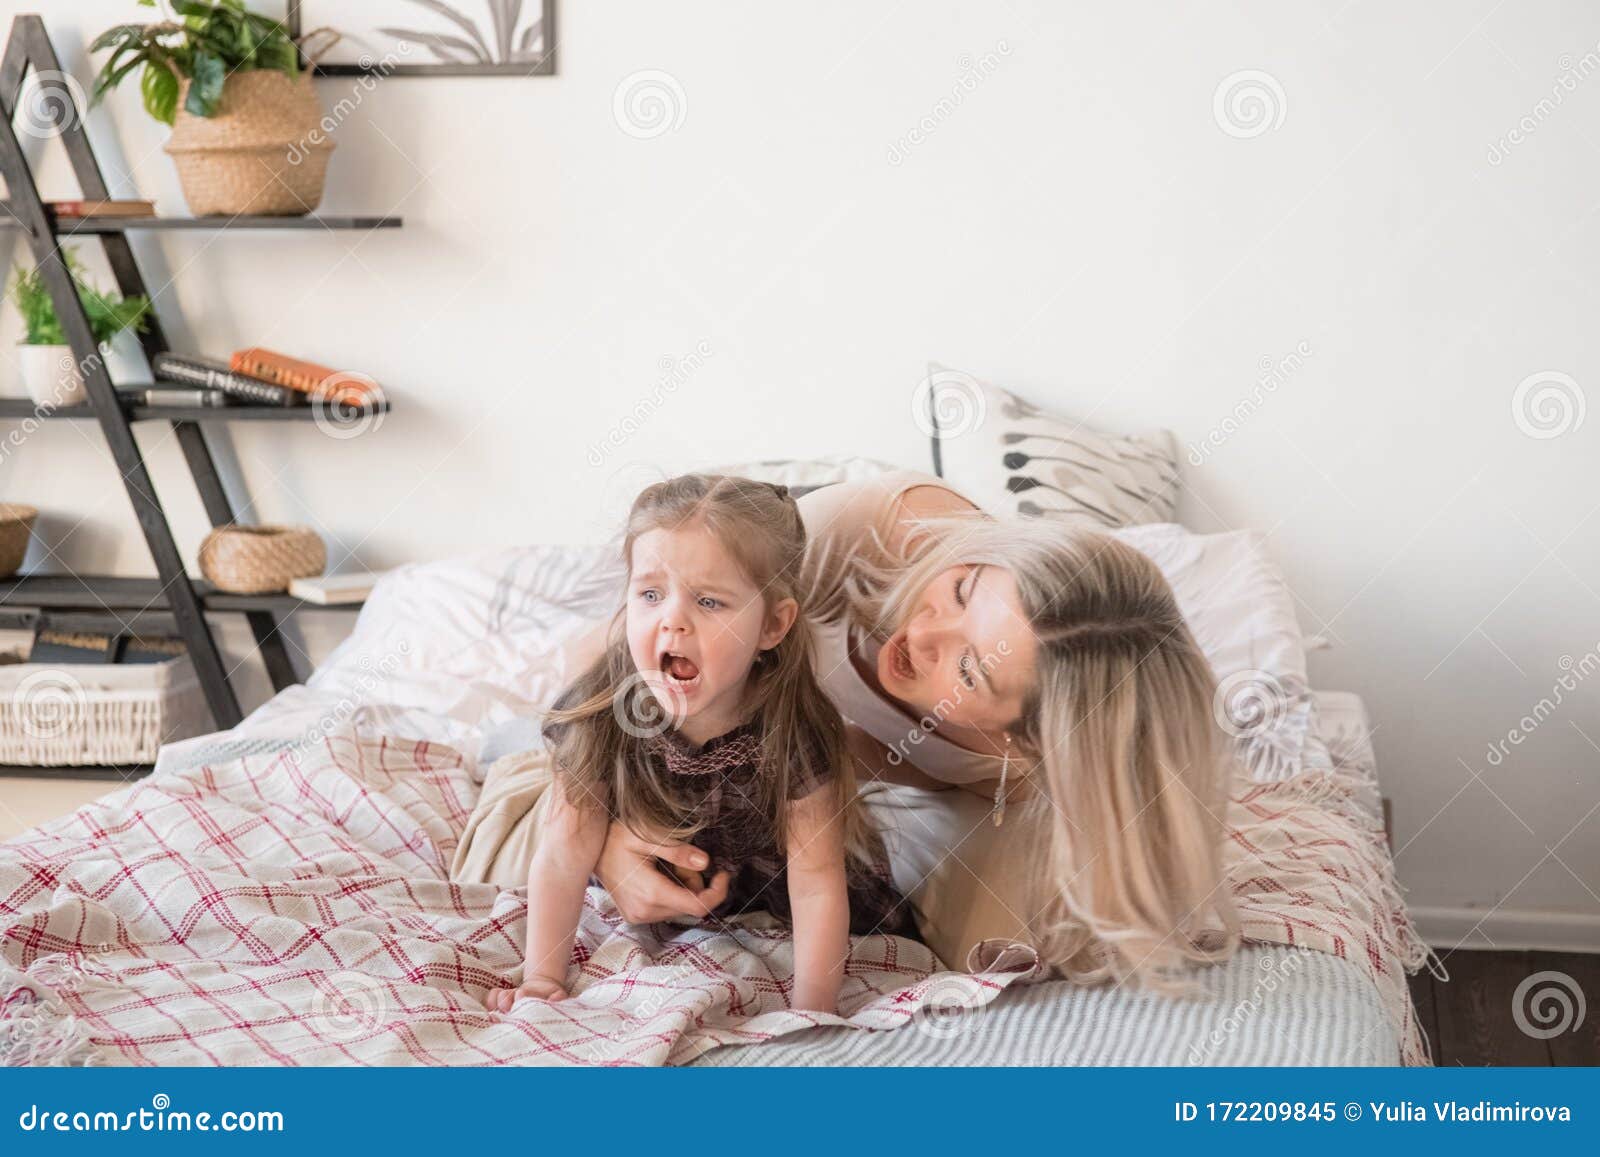 Mother And Daughter Jumping On Bed Having Fun Together Stock Image